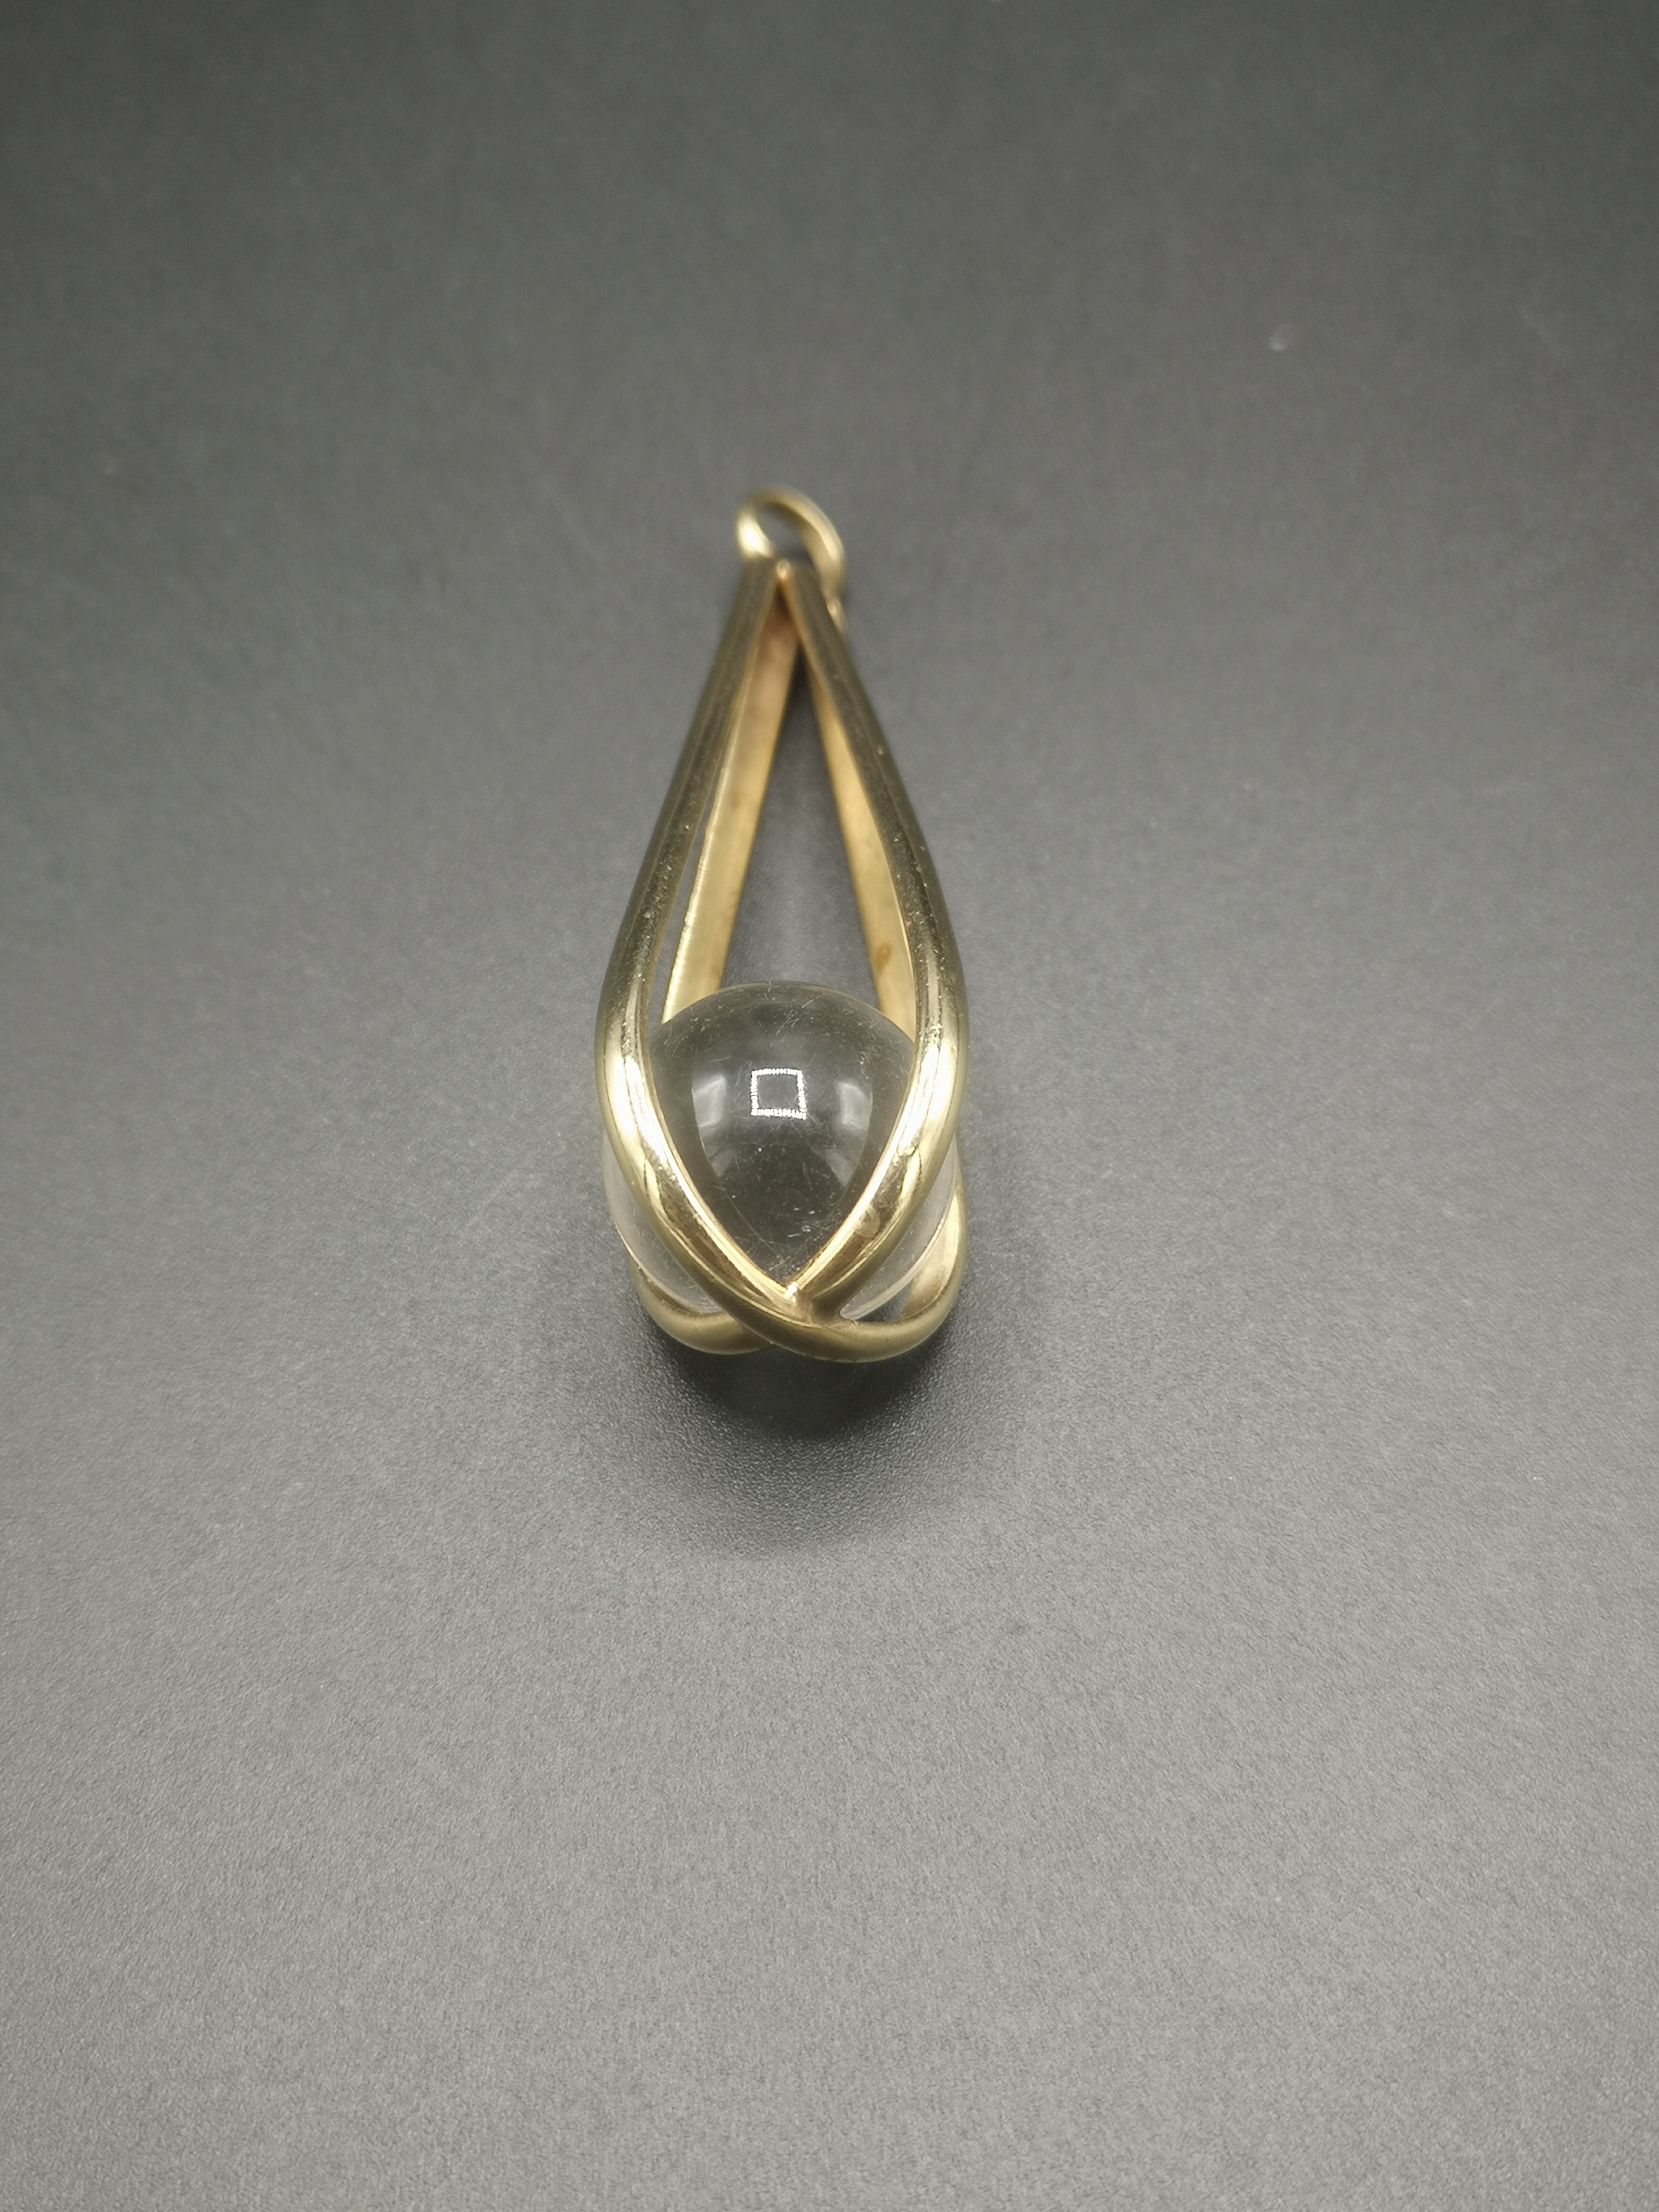 9ct gold pendant together with a 9ct gold ring - Image 3 of 8